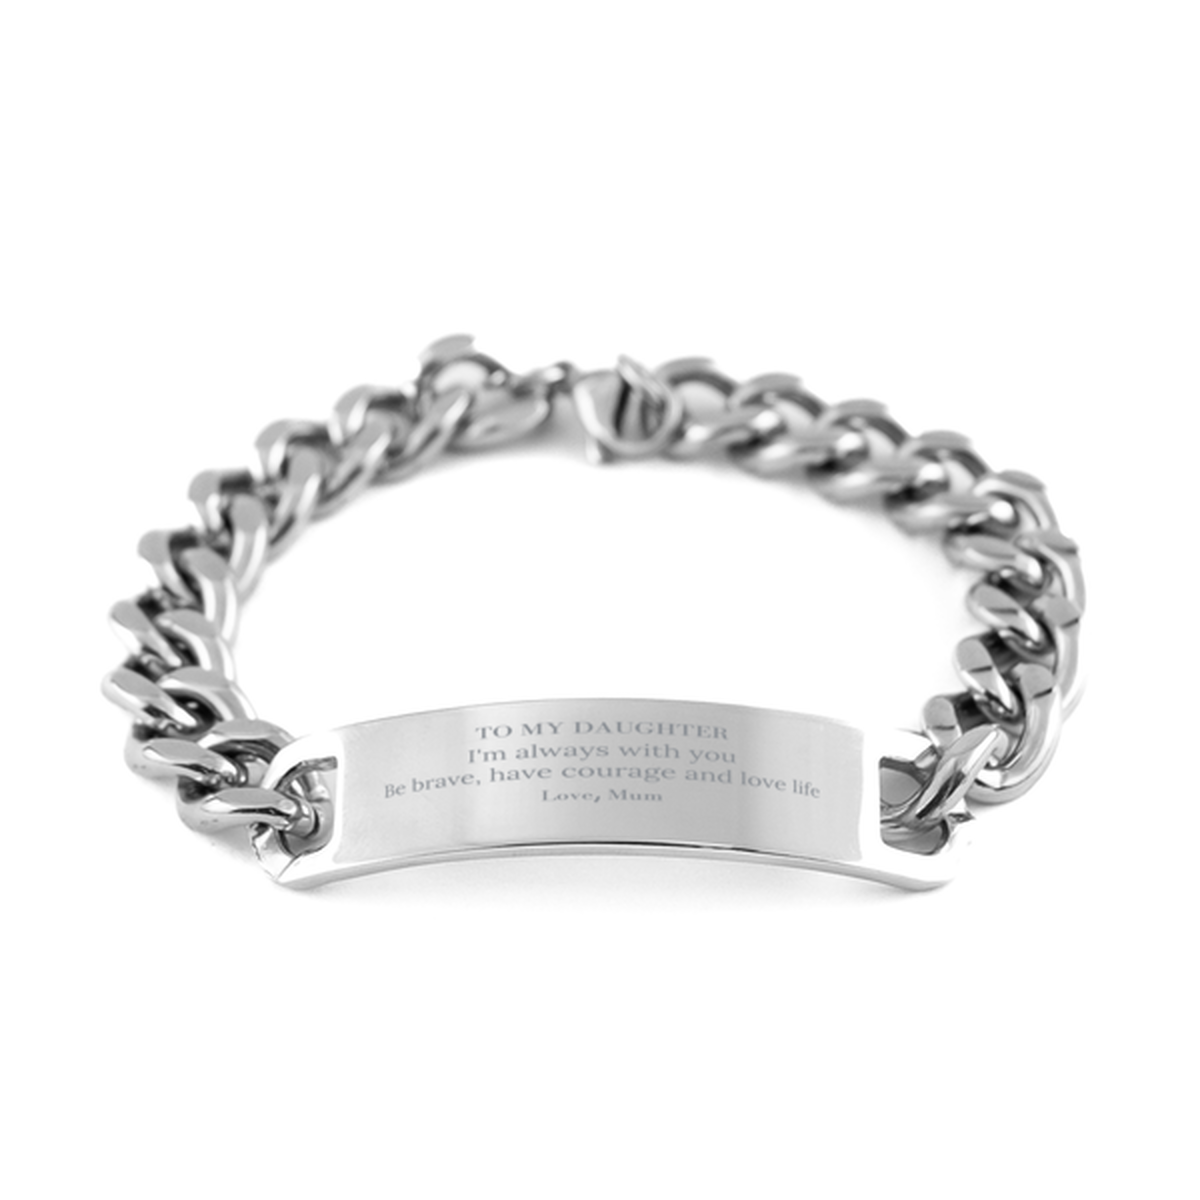 To My Daughter Gifts from Mum, Unique Cuban Chain Stainless Steel Bracelet Inspirational Christmas Birthday Graduation Gifts for Daughter I'm always with you. Be brave, have courage and love life. Love, Mum